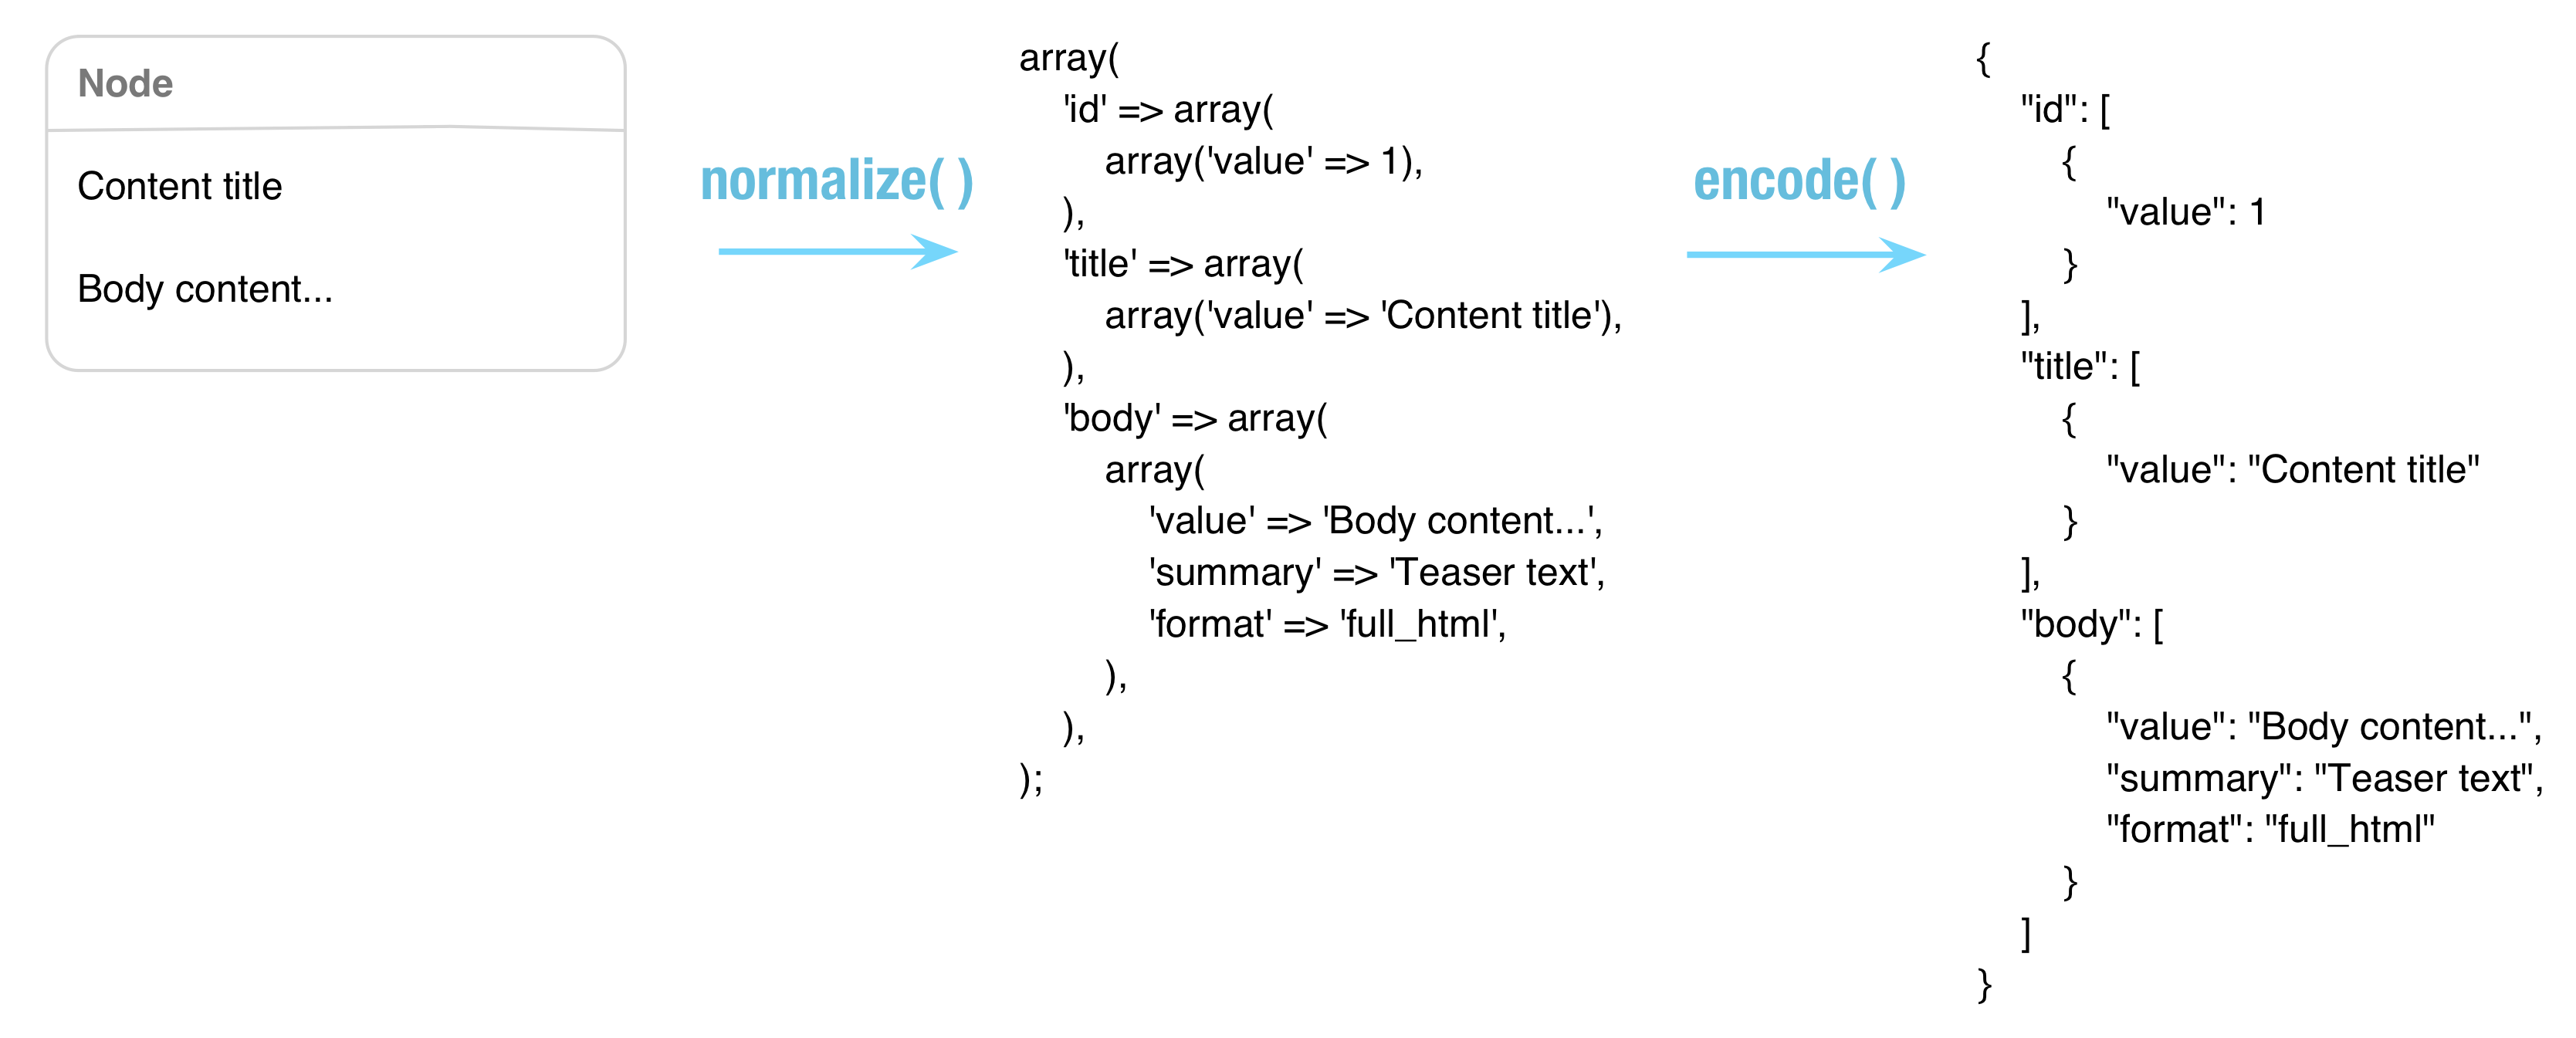 Serializer workflow from object to array using Normalizer::normalize, and from array to string using Encoder::encode.